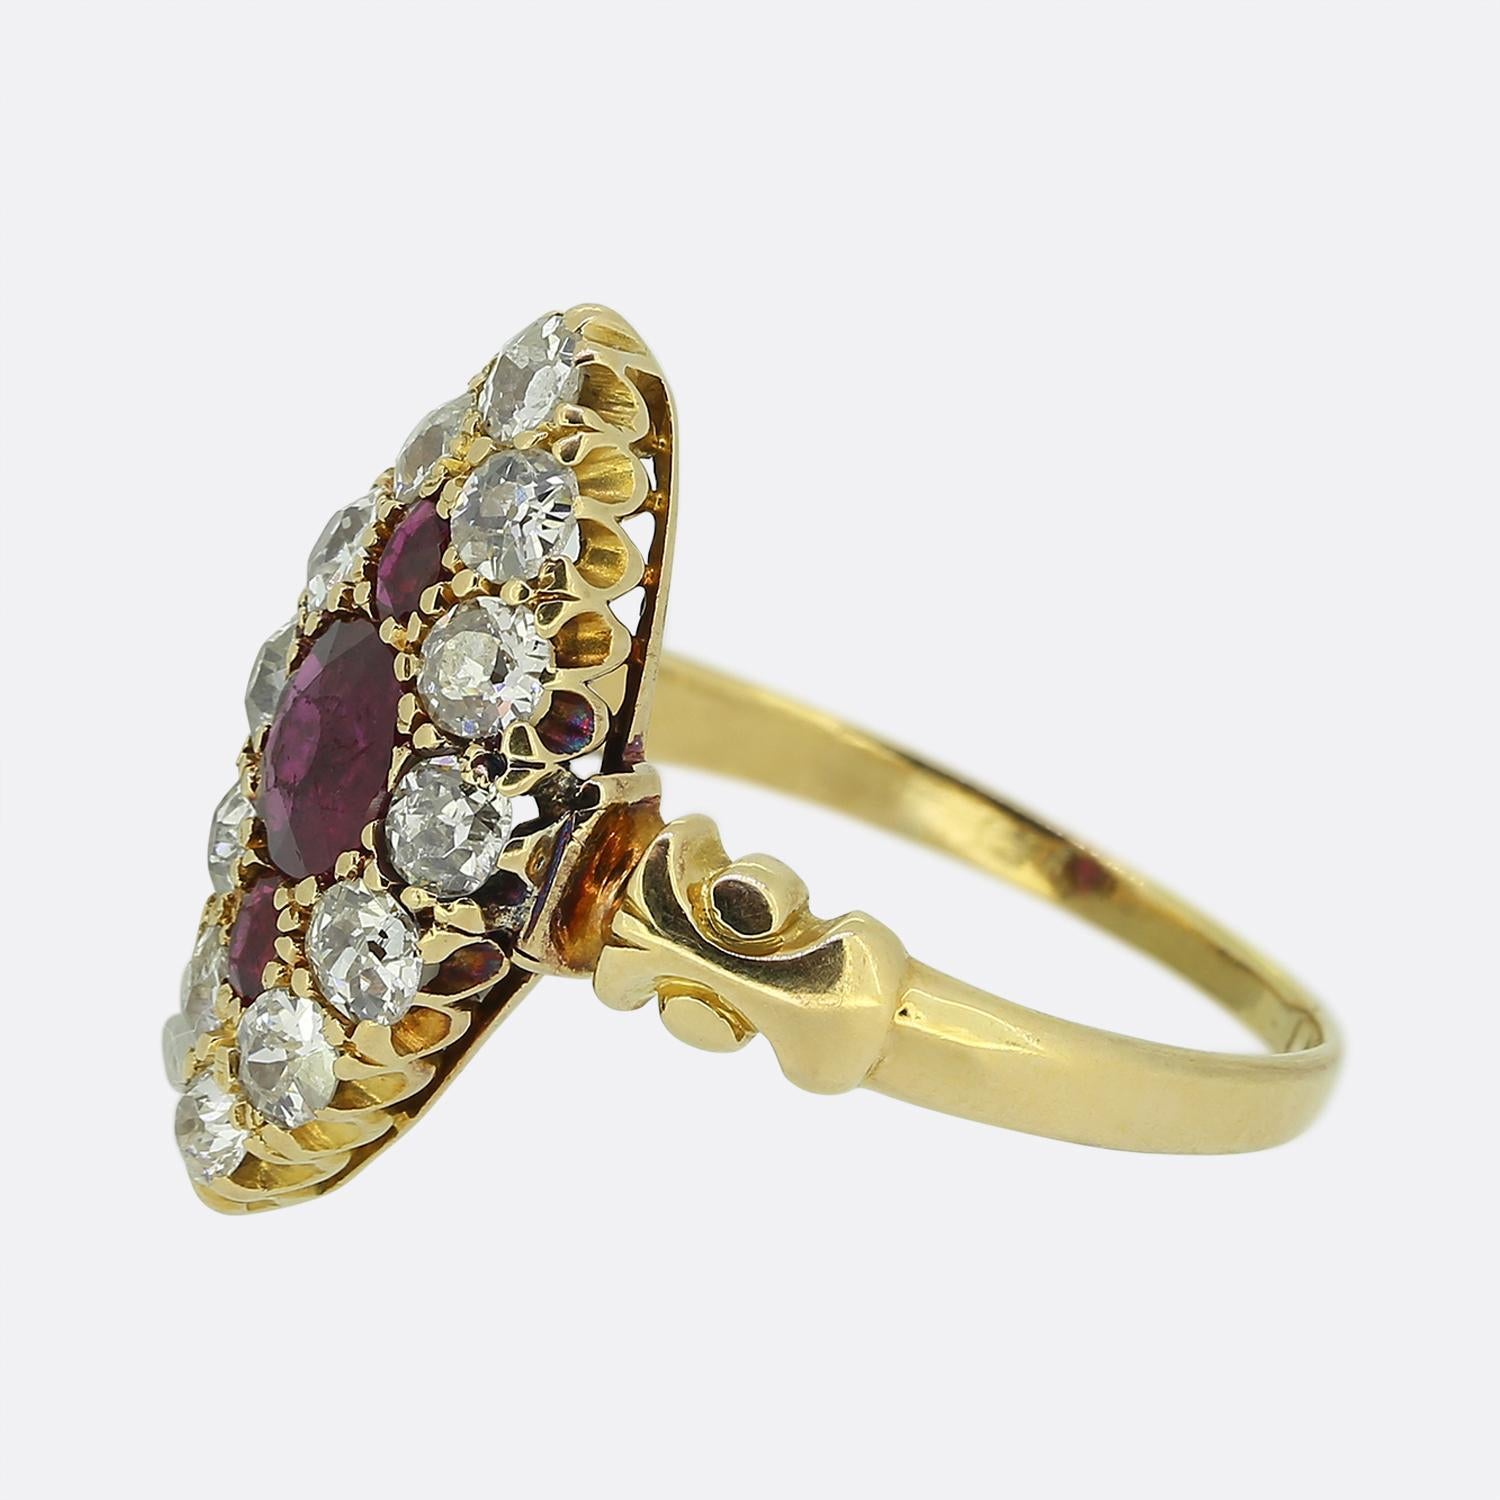 Here we have an excellently crafted navette ring taken from the Edwardian period. This 18ct yellow gold piece showcases the typical boat-like shaped head with a trio of perfectly matched rich red rubies at the centre. These focal stones are then